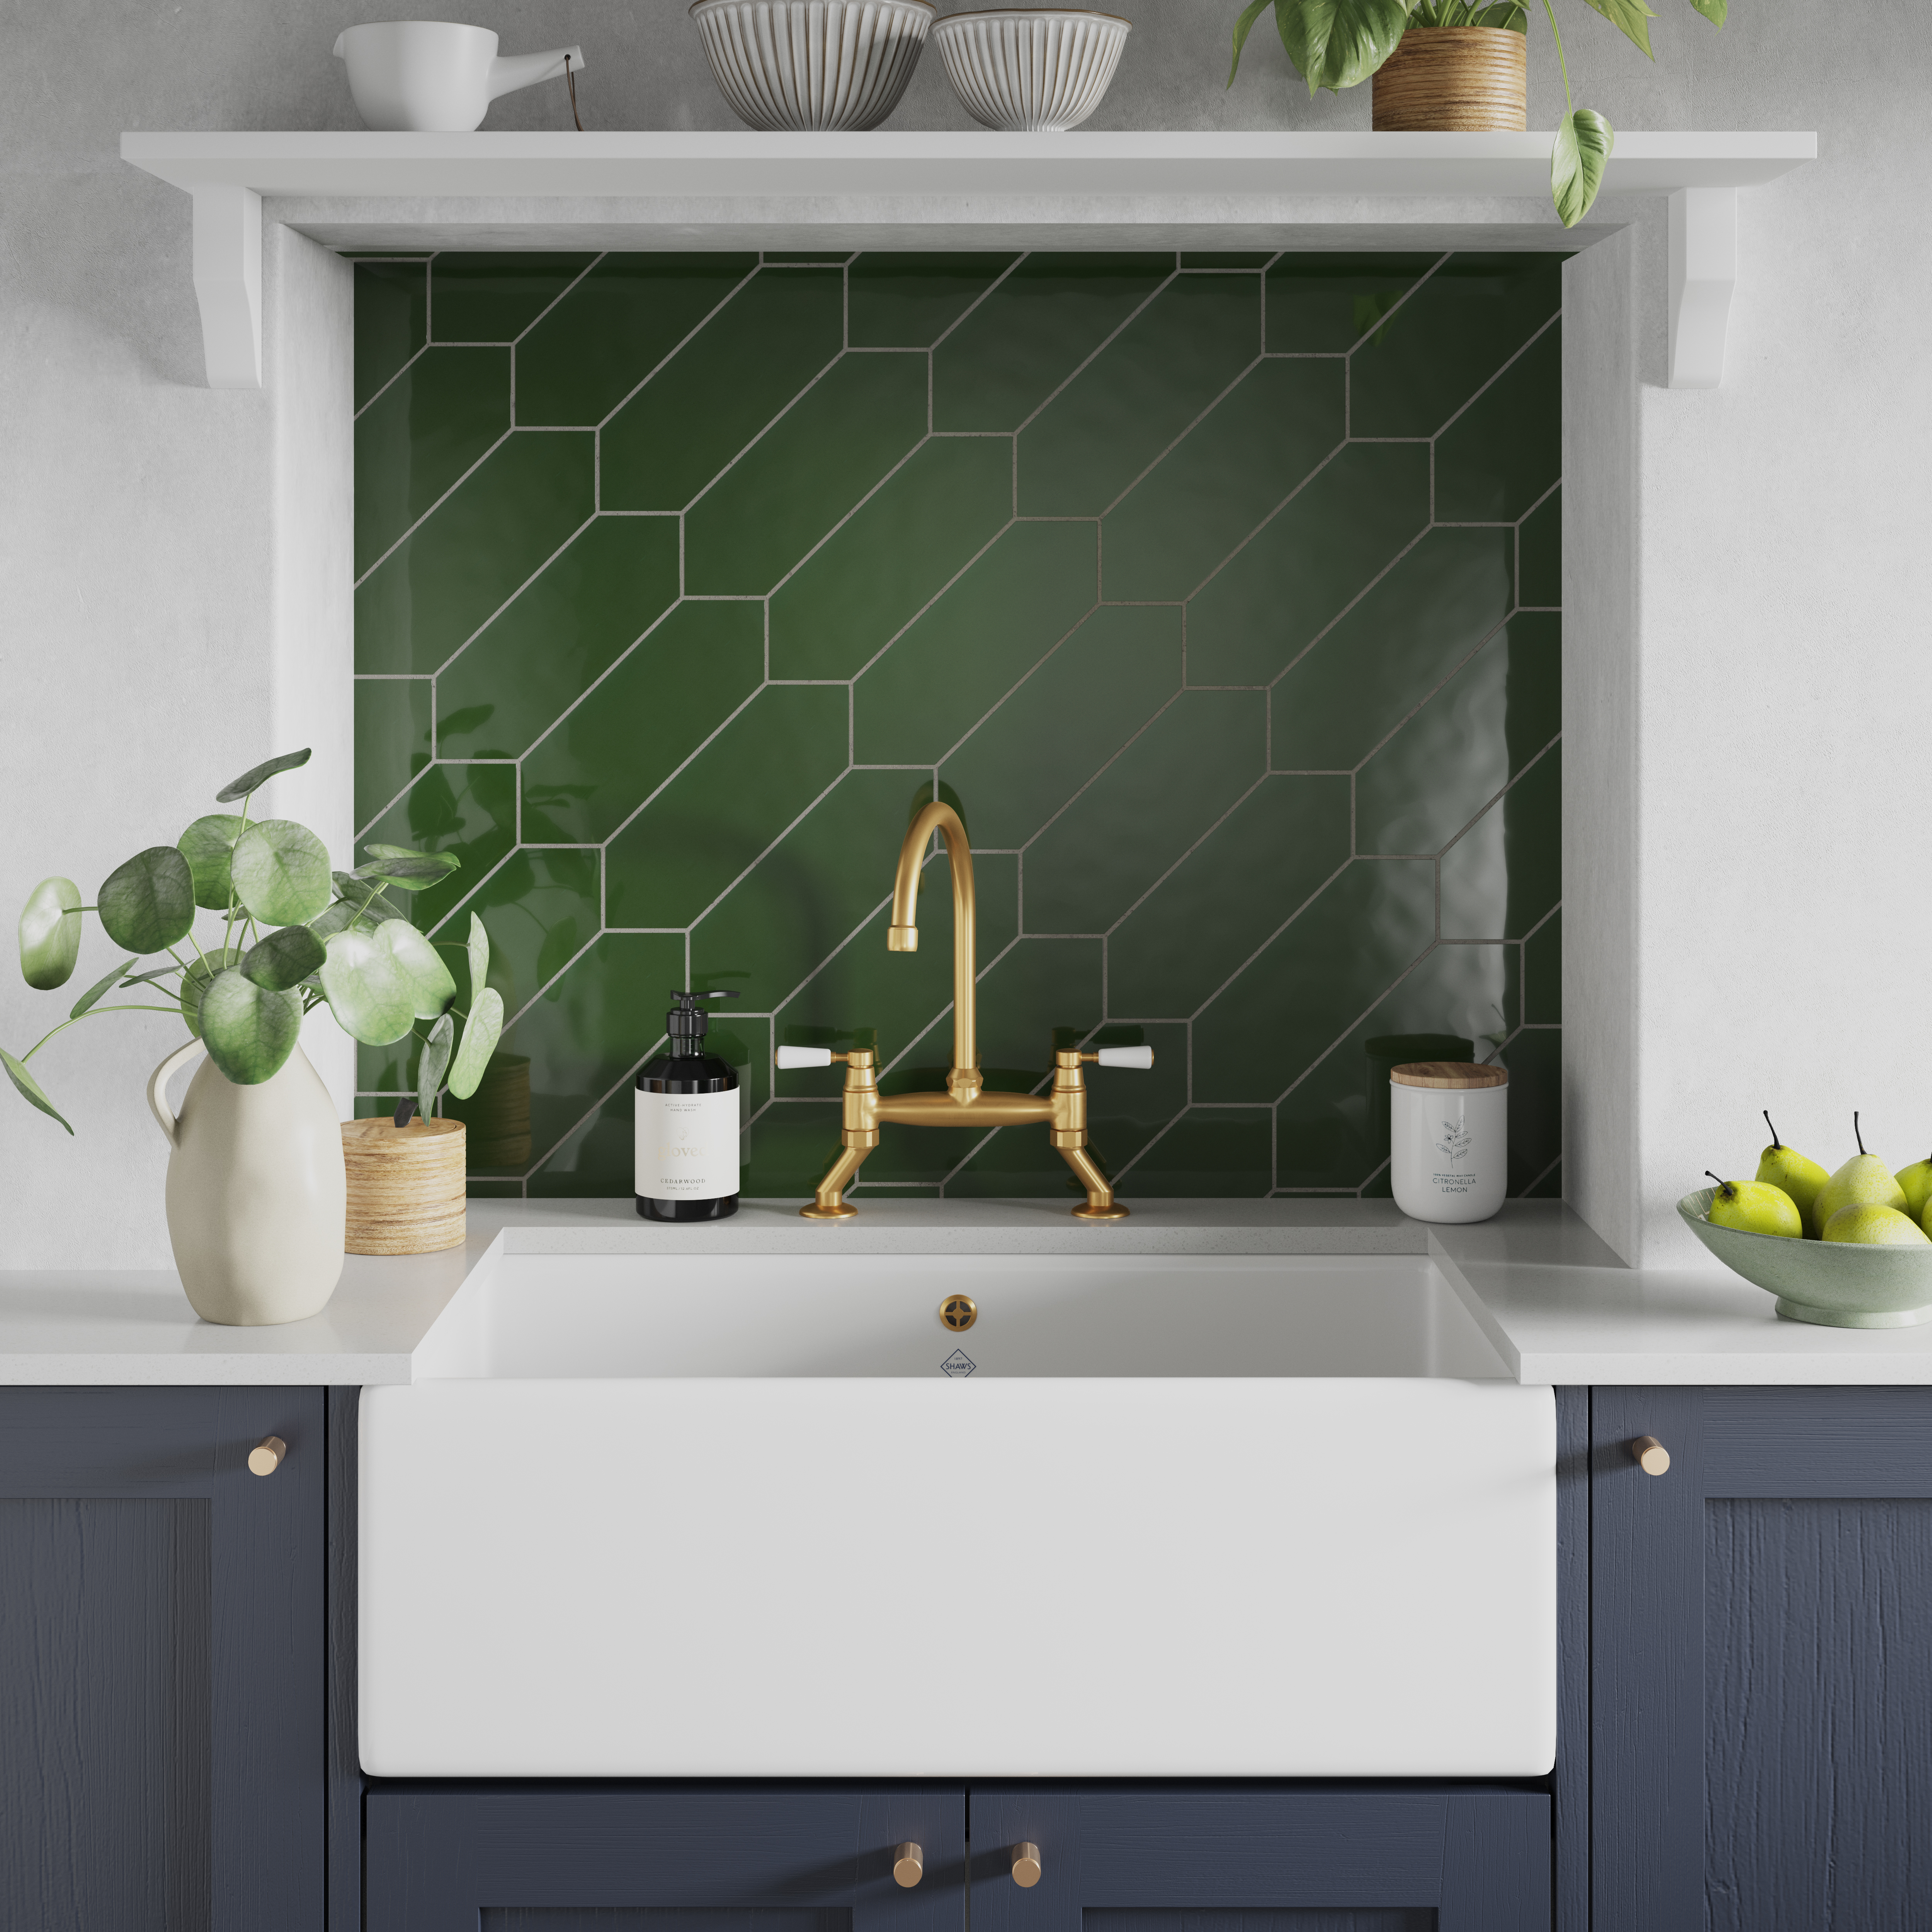 Image of Wickes Boutique Clover Green Gloss Ceramic Wall Tile 300x100mm Pk/40